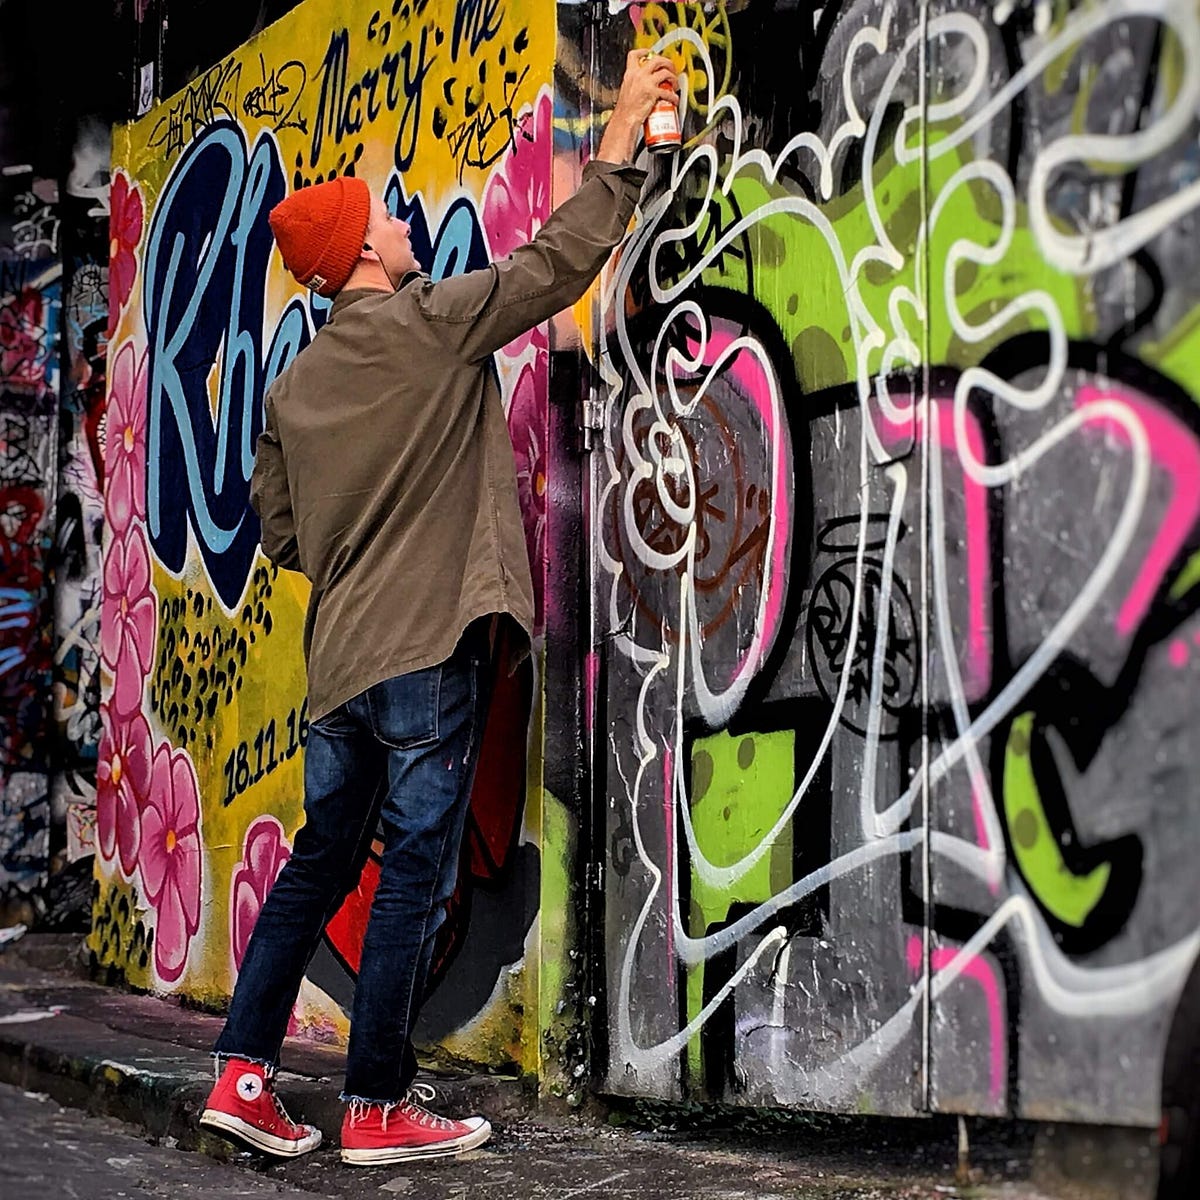 Street art photography tips for your iPhone and Android smartphone. by SmartphonePhotographyTraining.com